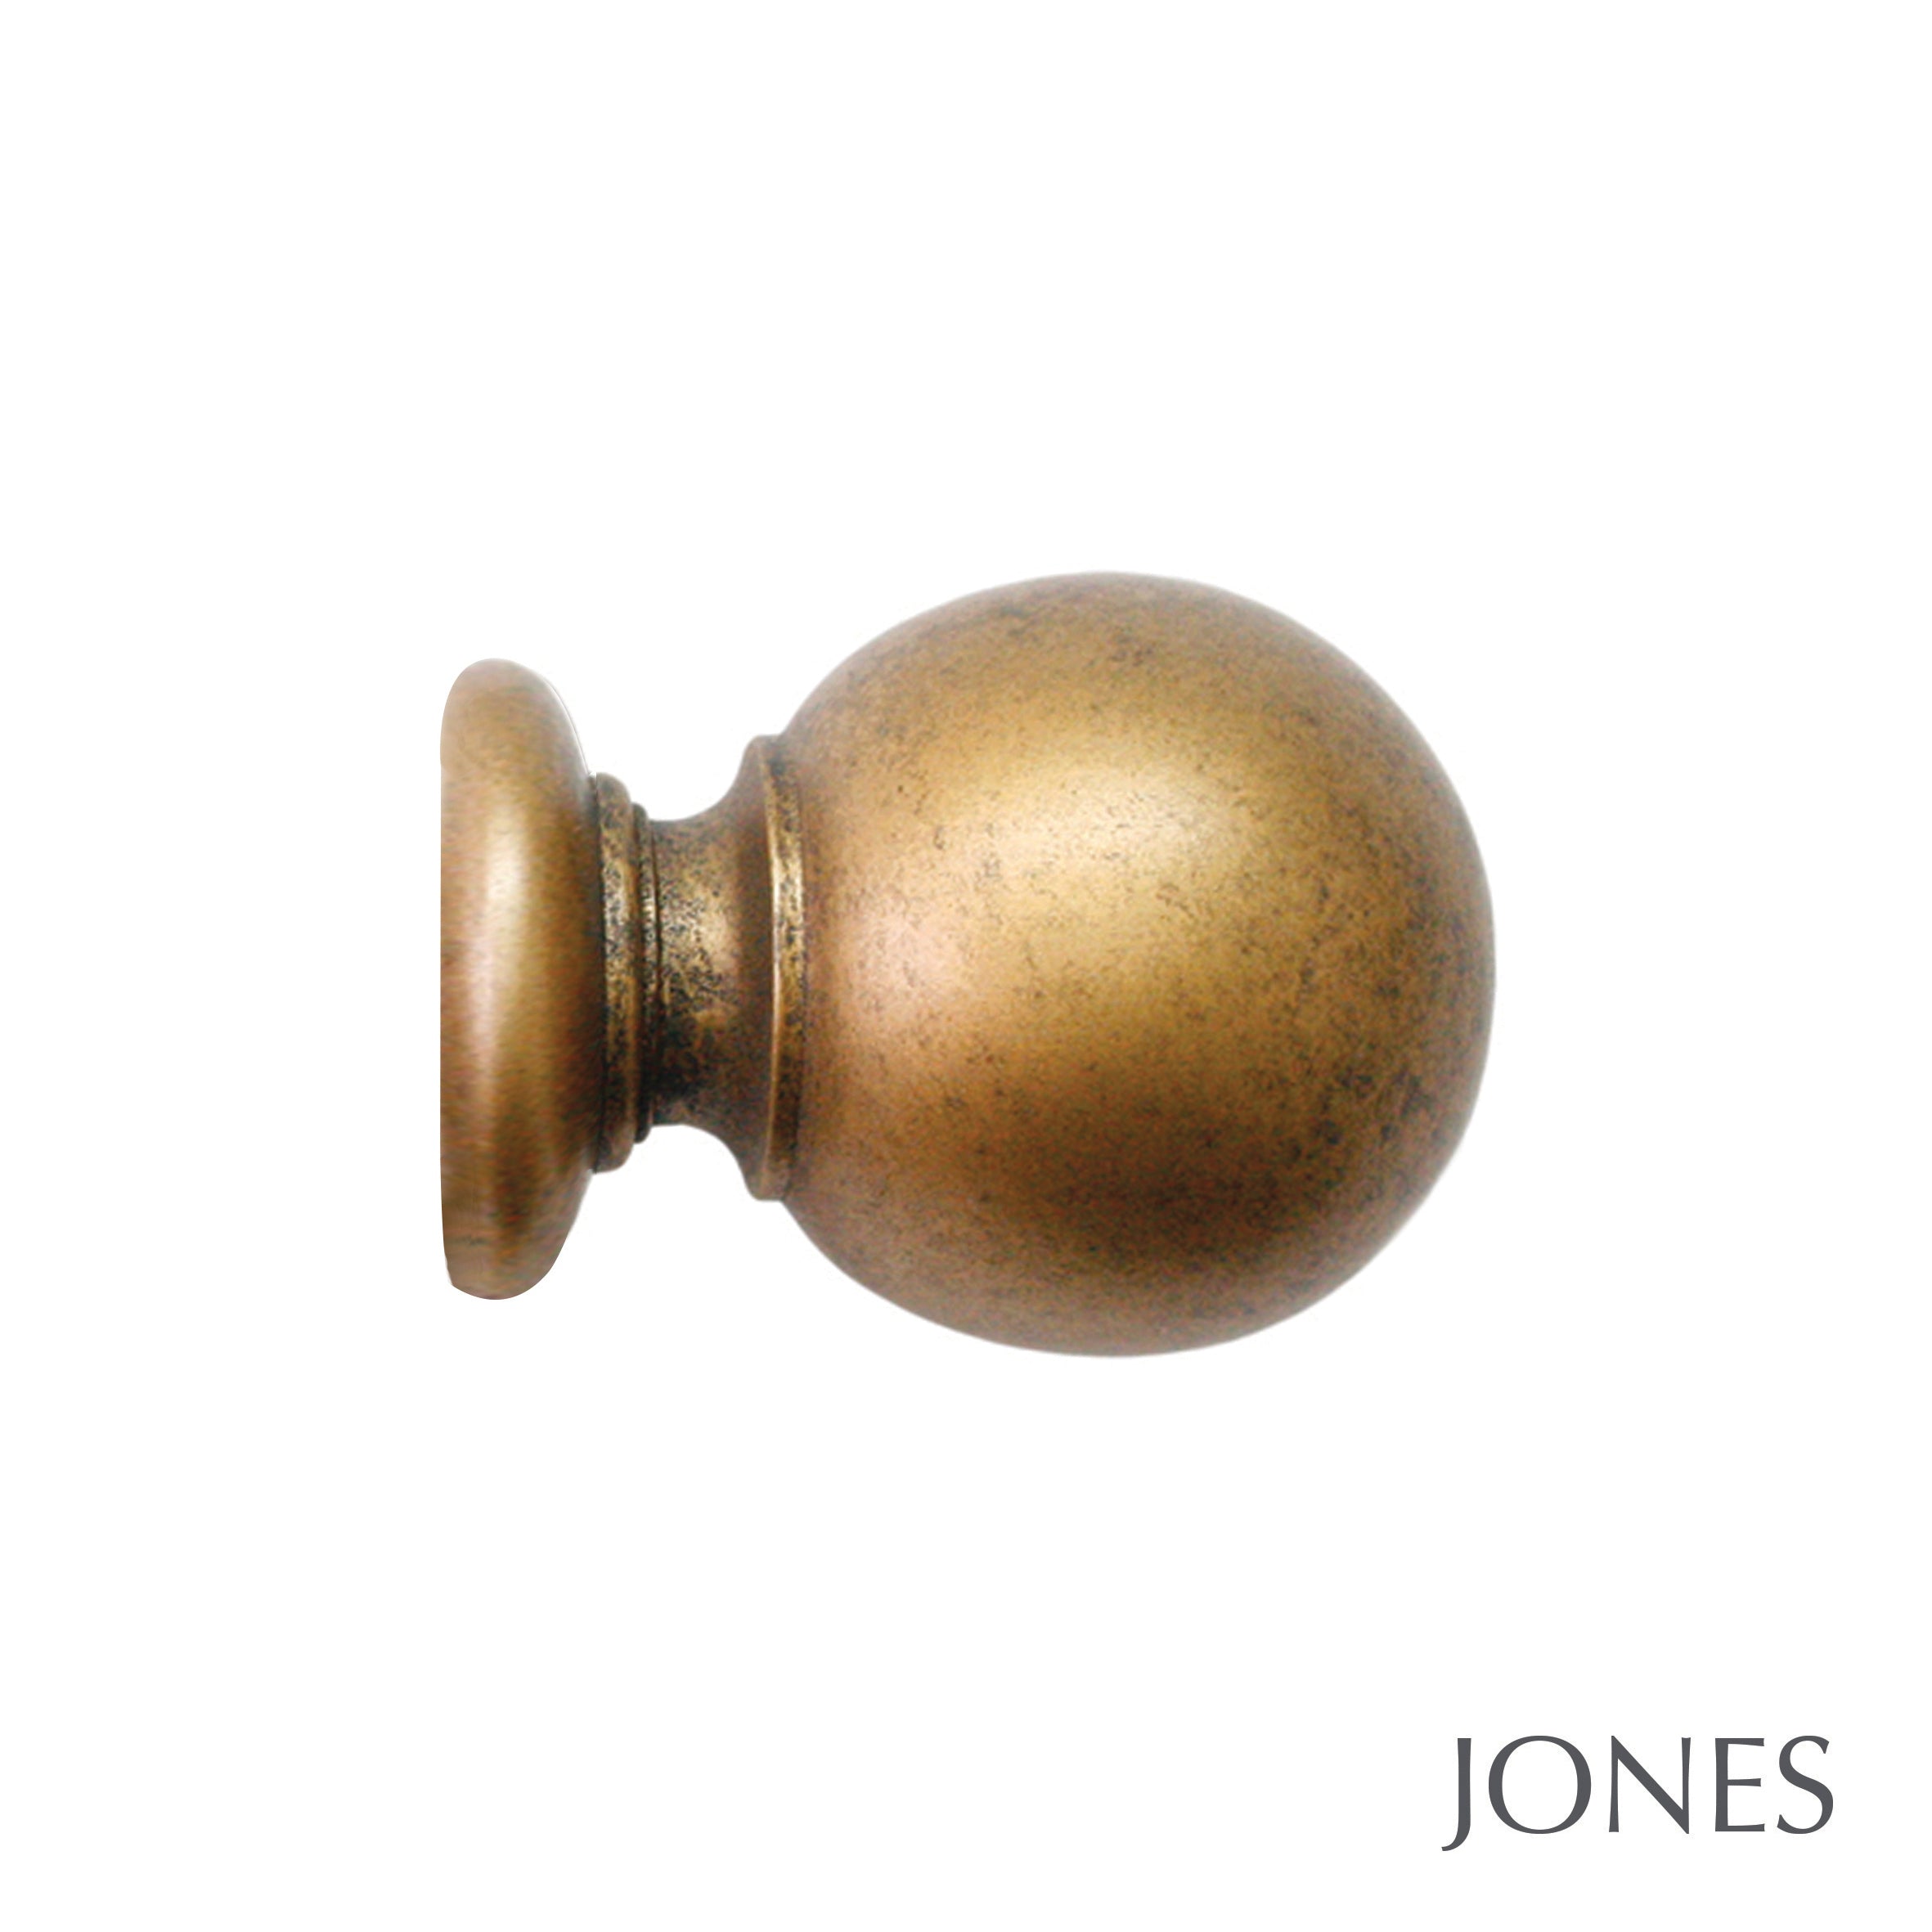 Jones Interiors Cathedral Ball Finial Curtain Pole Set in Antique Gold